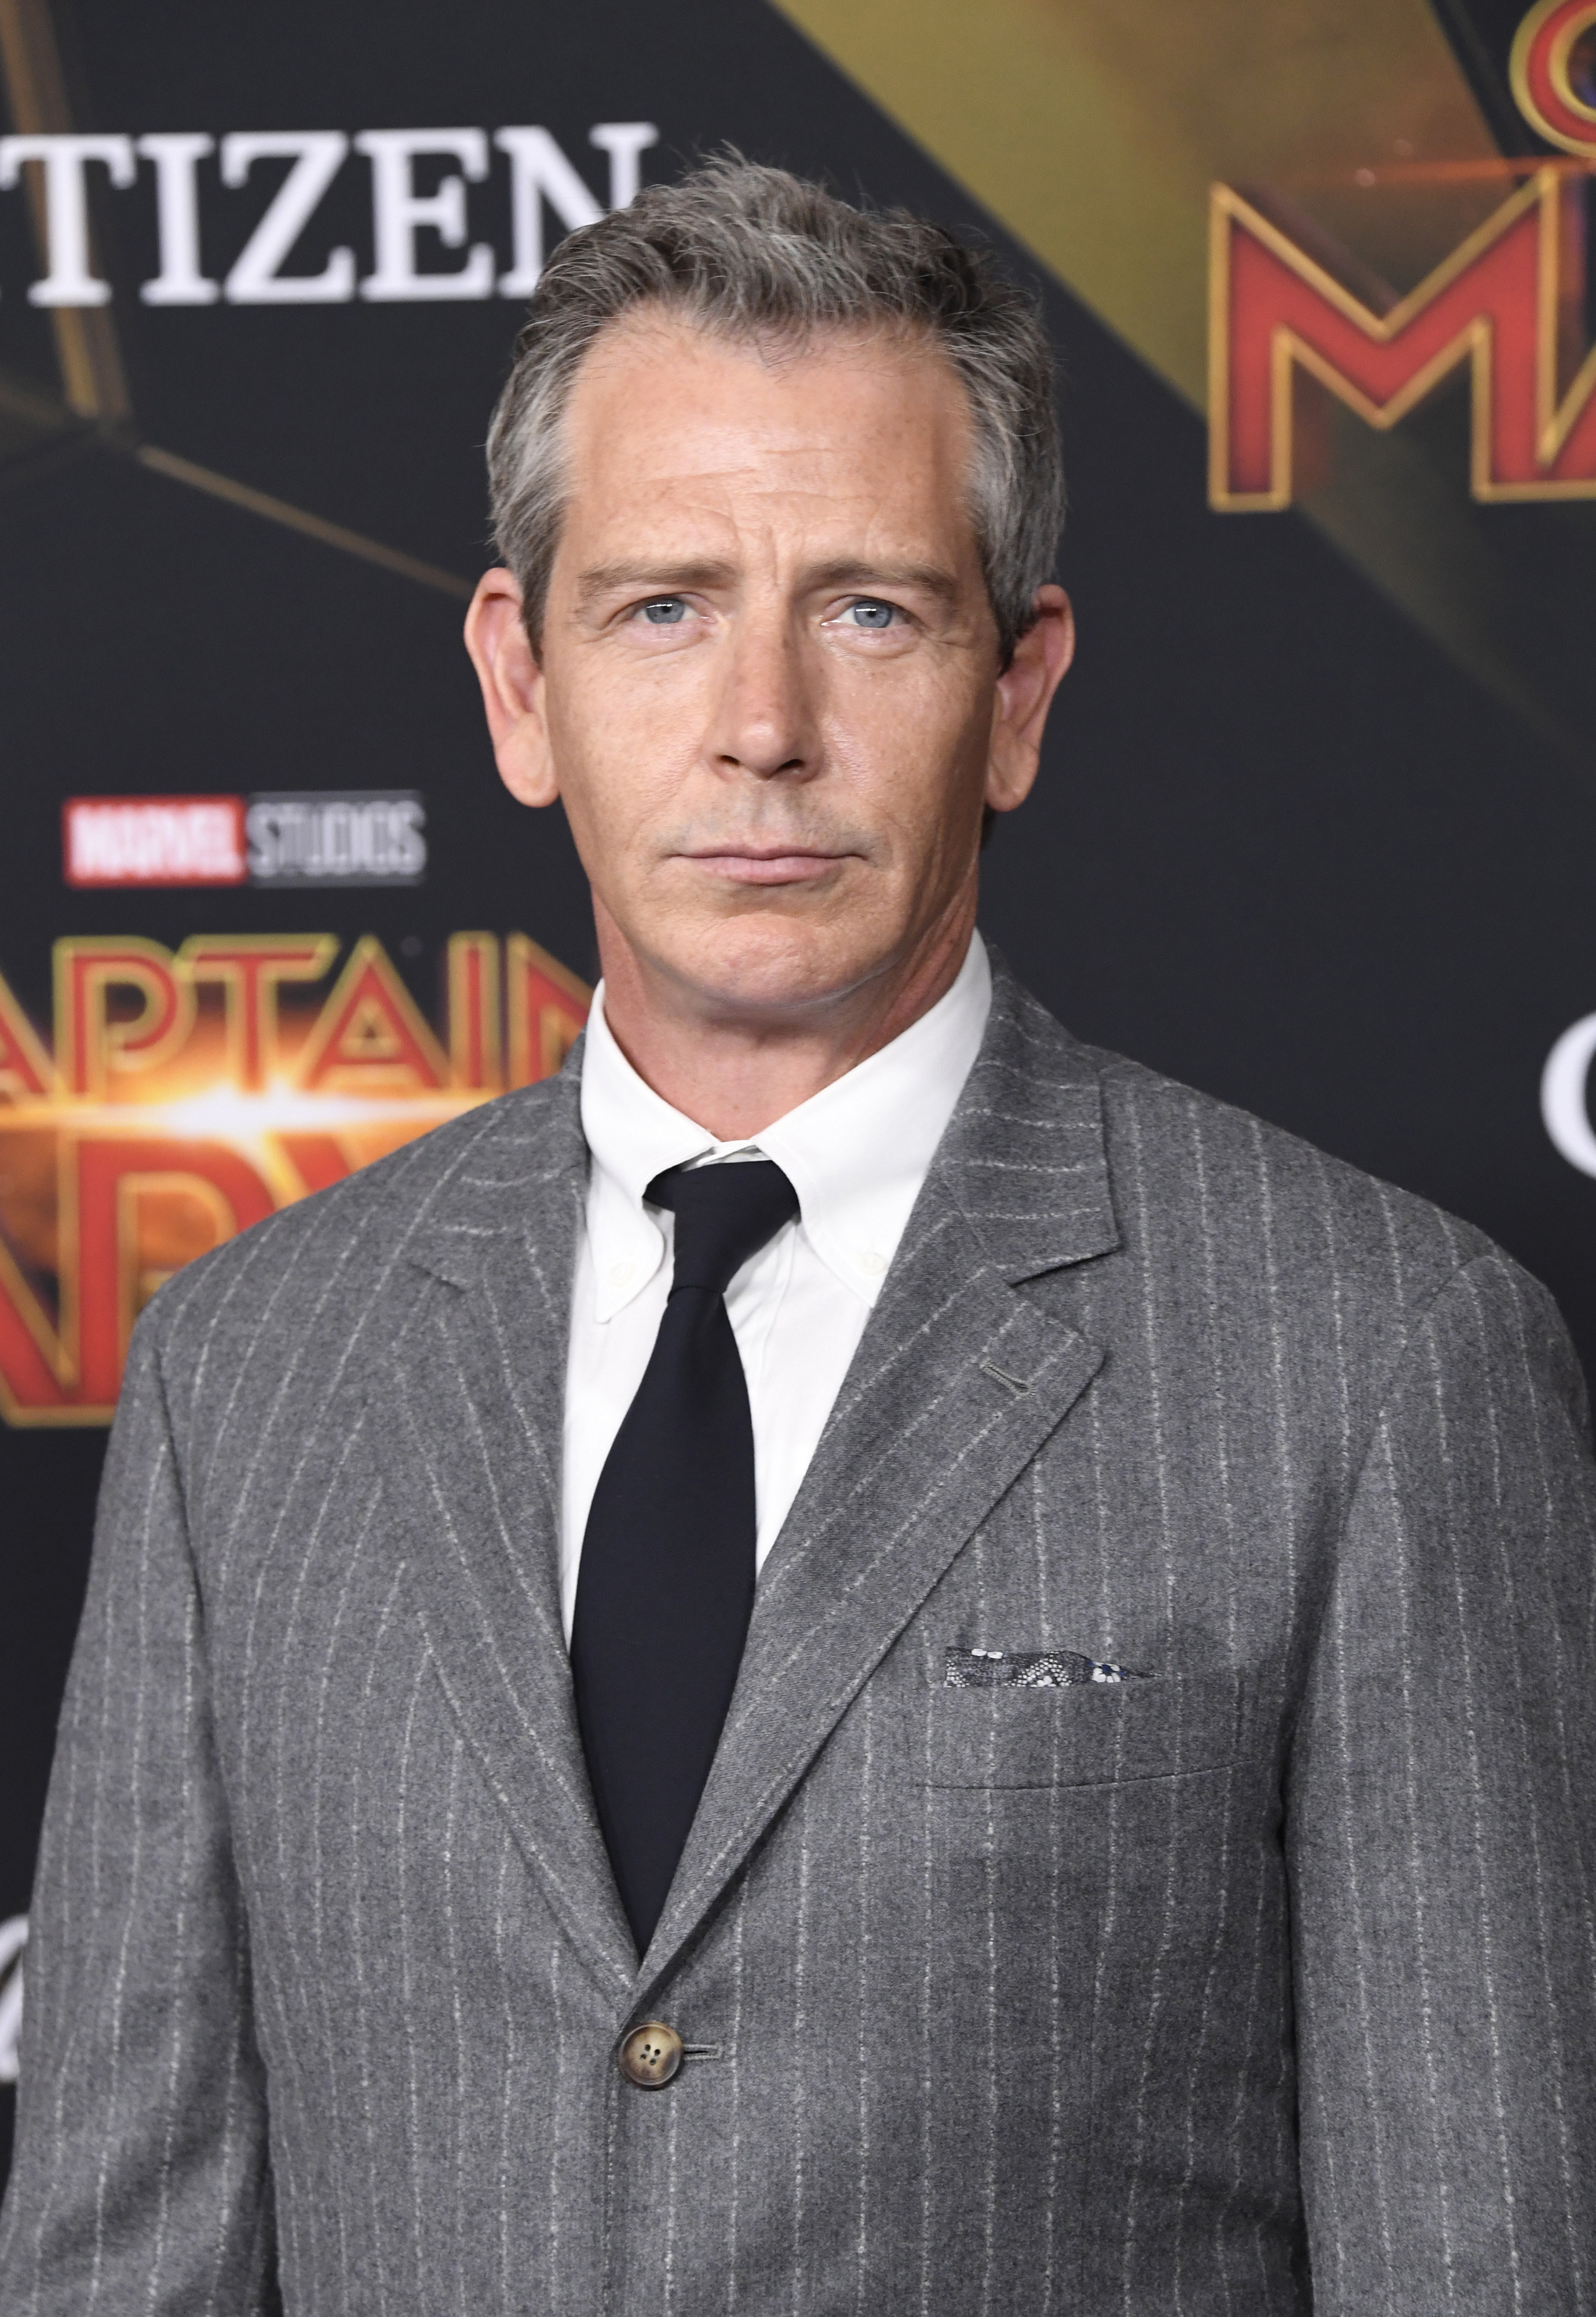 Ben at the Captain Marvel premiere in a grey pinstripe suit with a black tie and white shirt